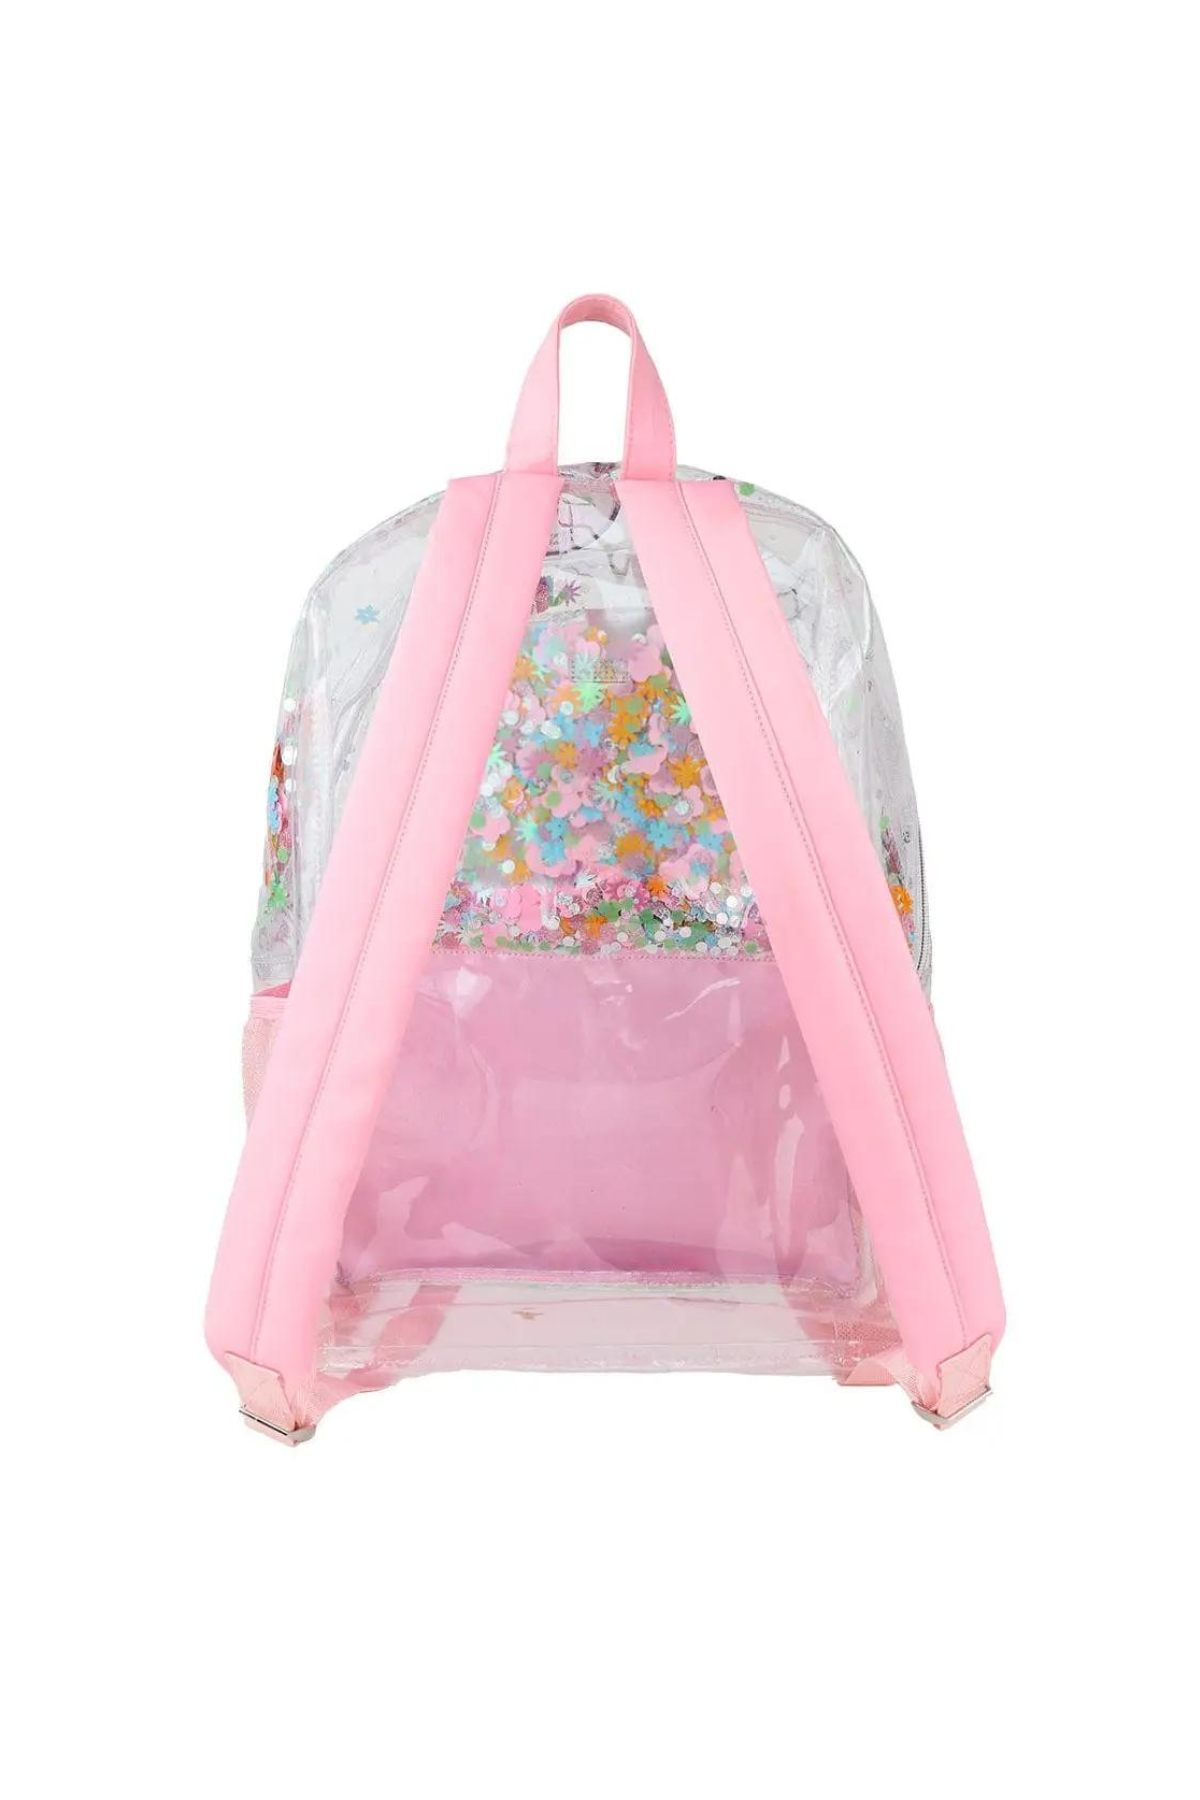 Flower Shop Confetti Clear Backpack